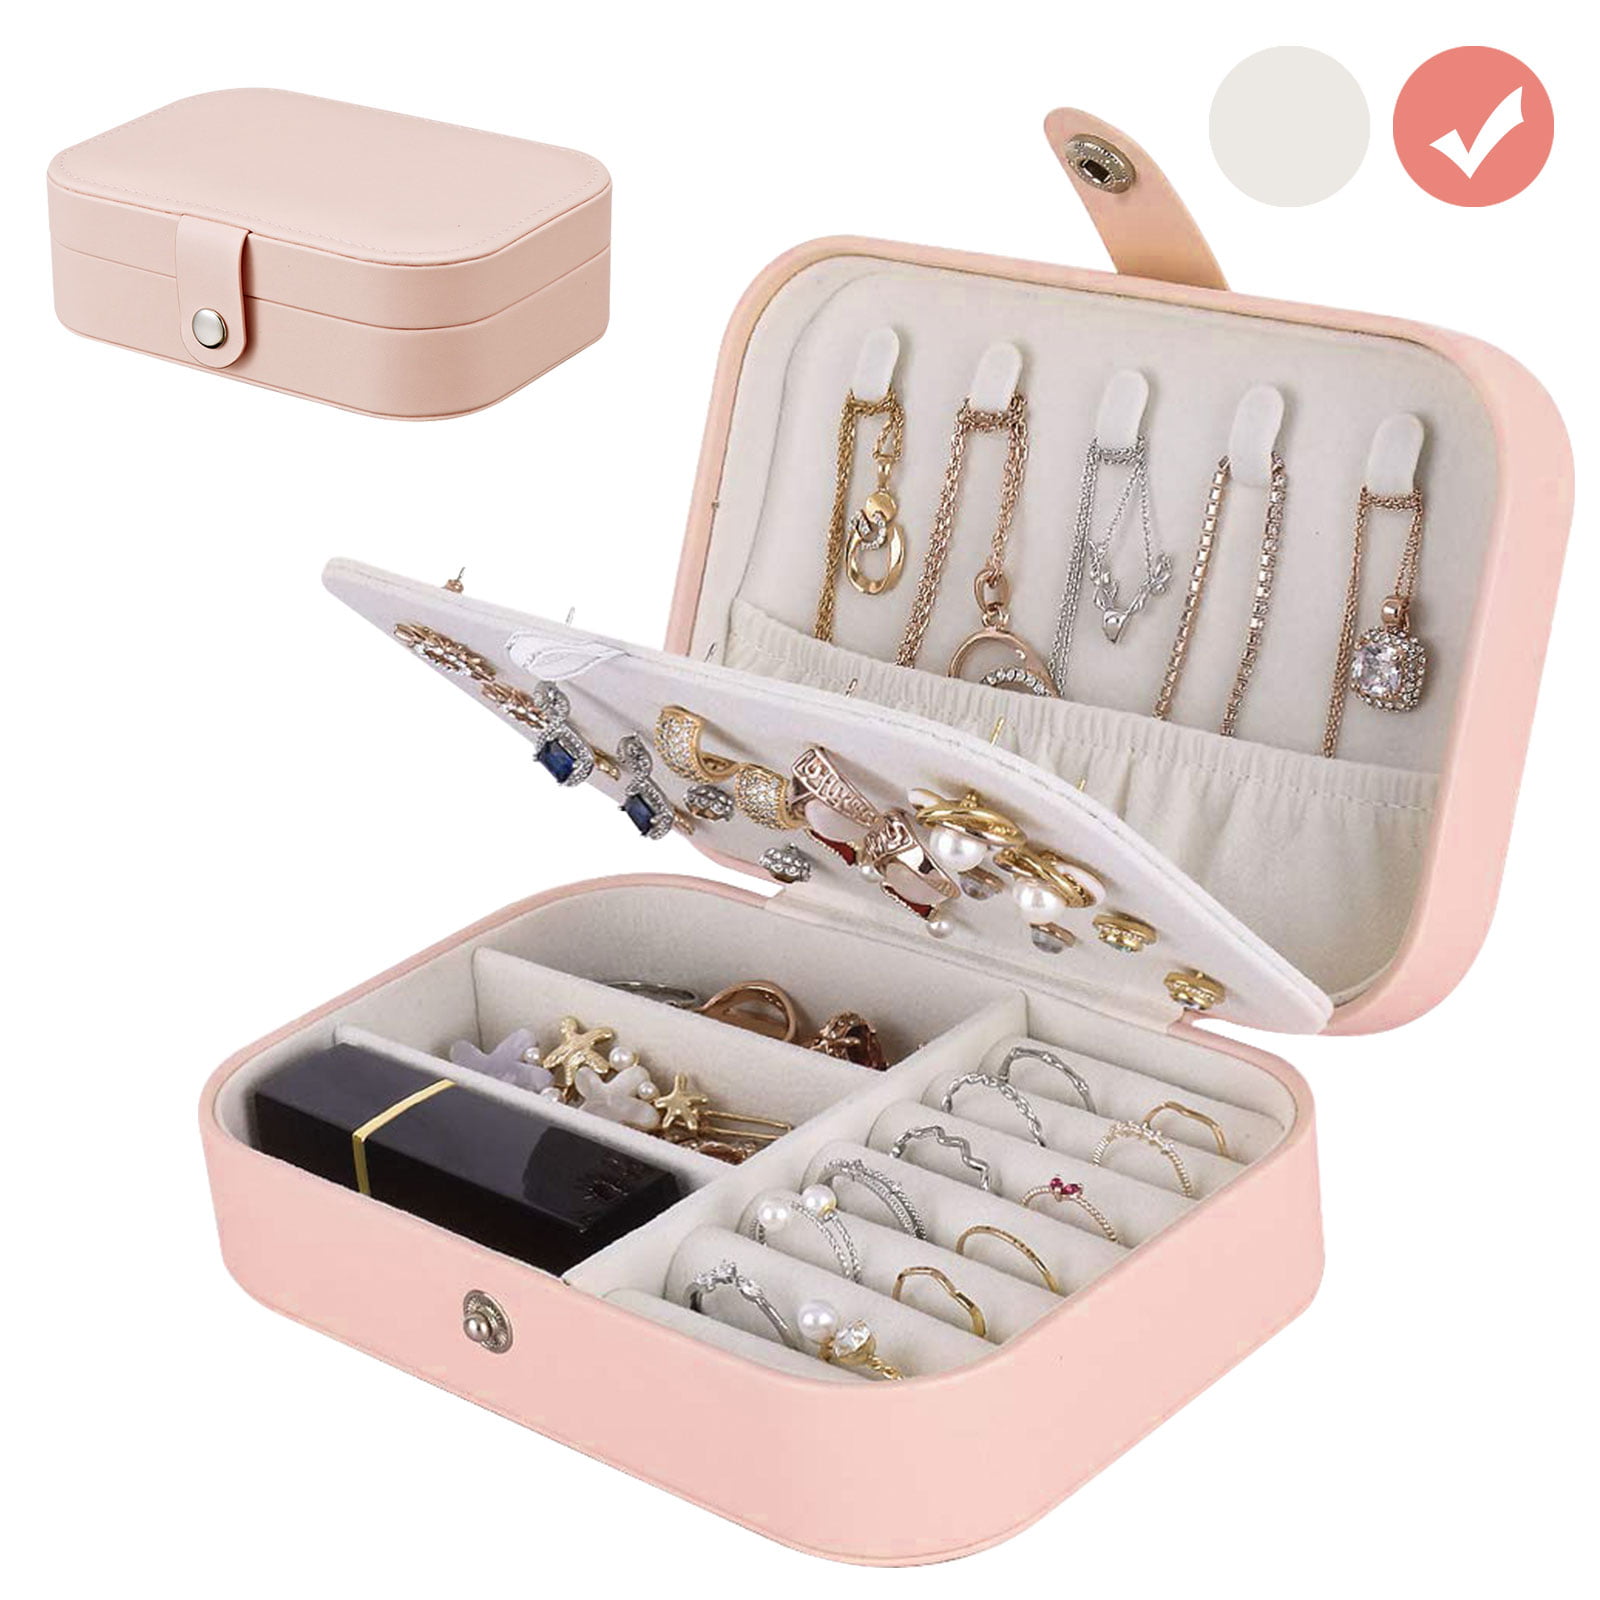 Jewellery Trinkets Display Box Travel Case Portable Organiser Gift With Mirror L 